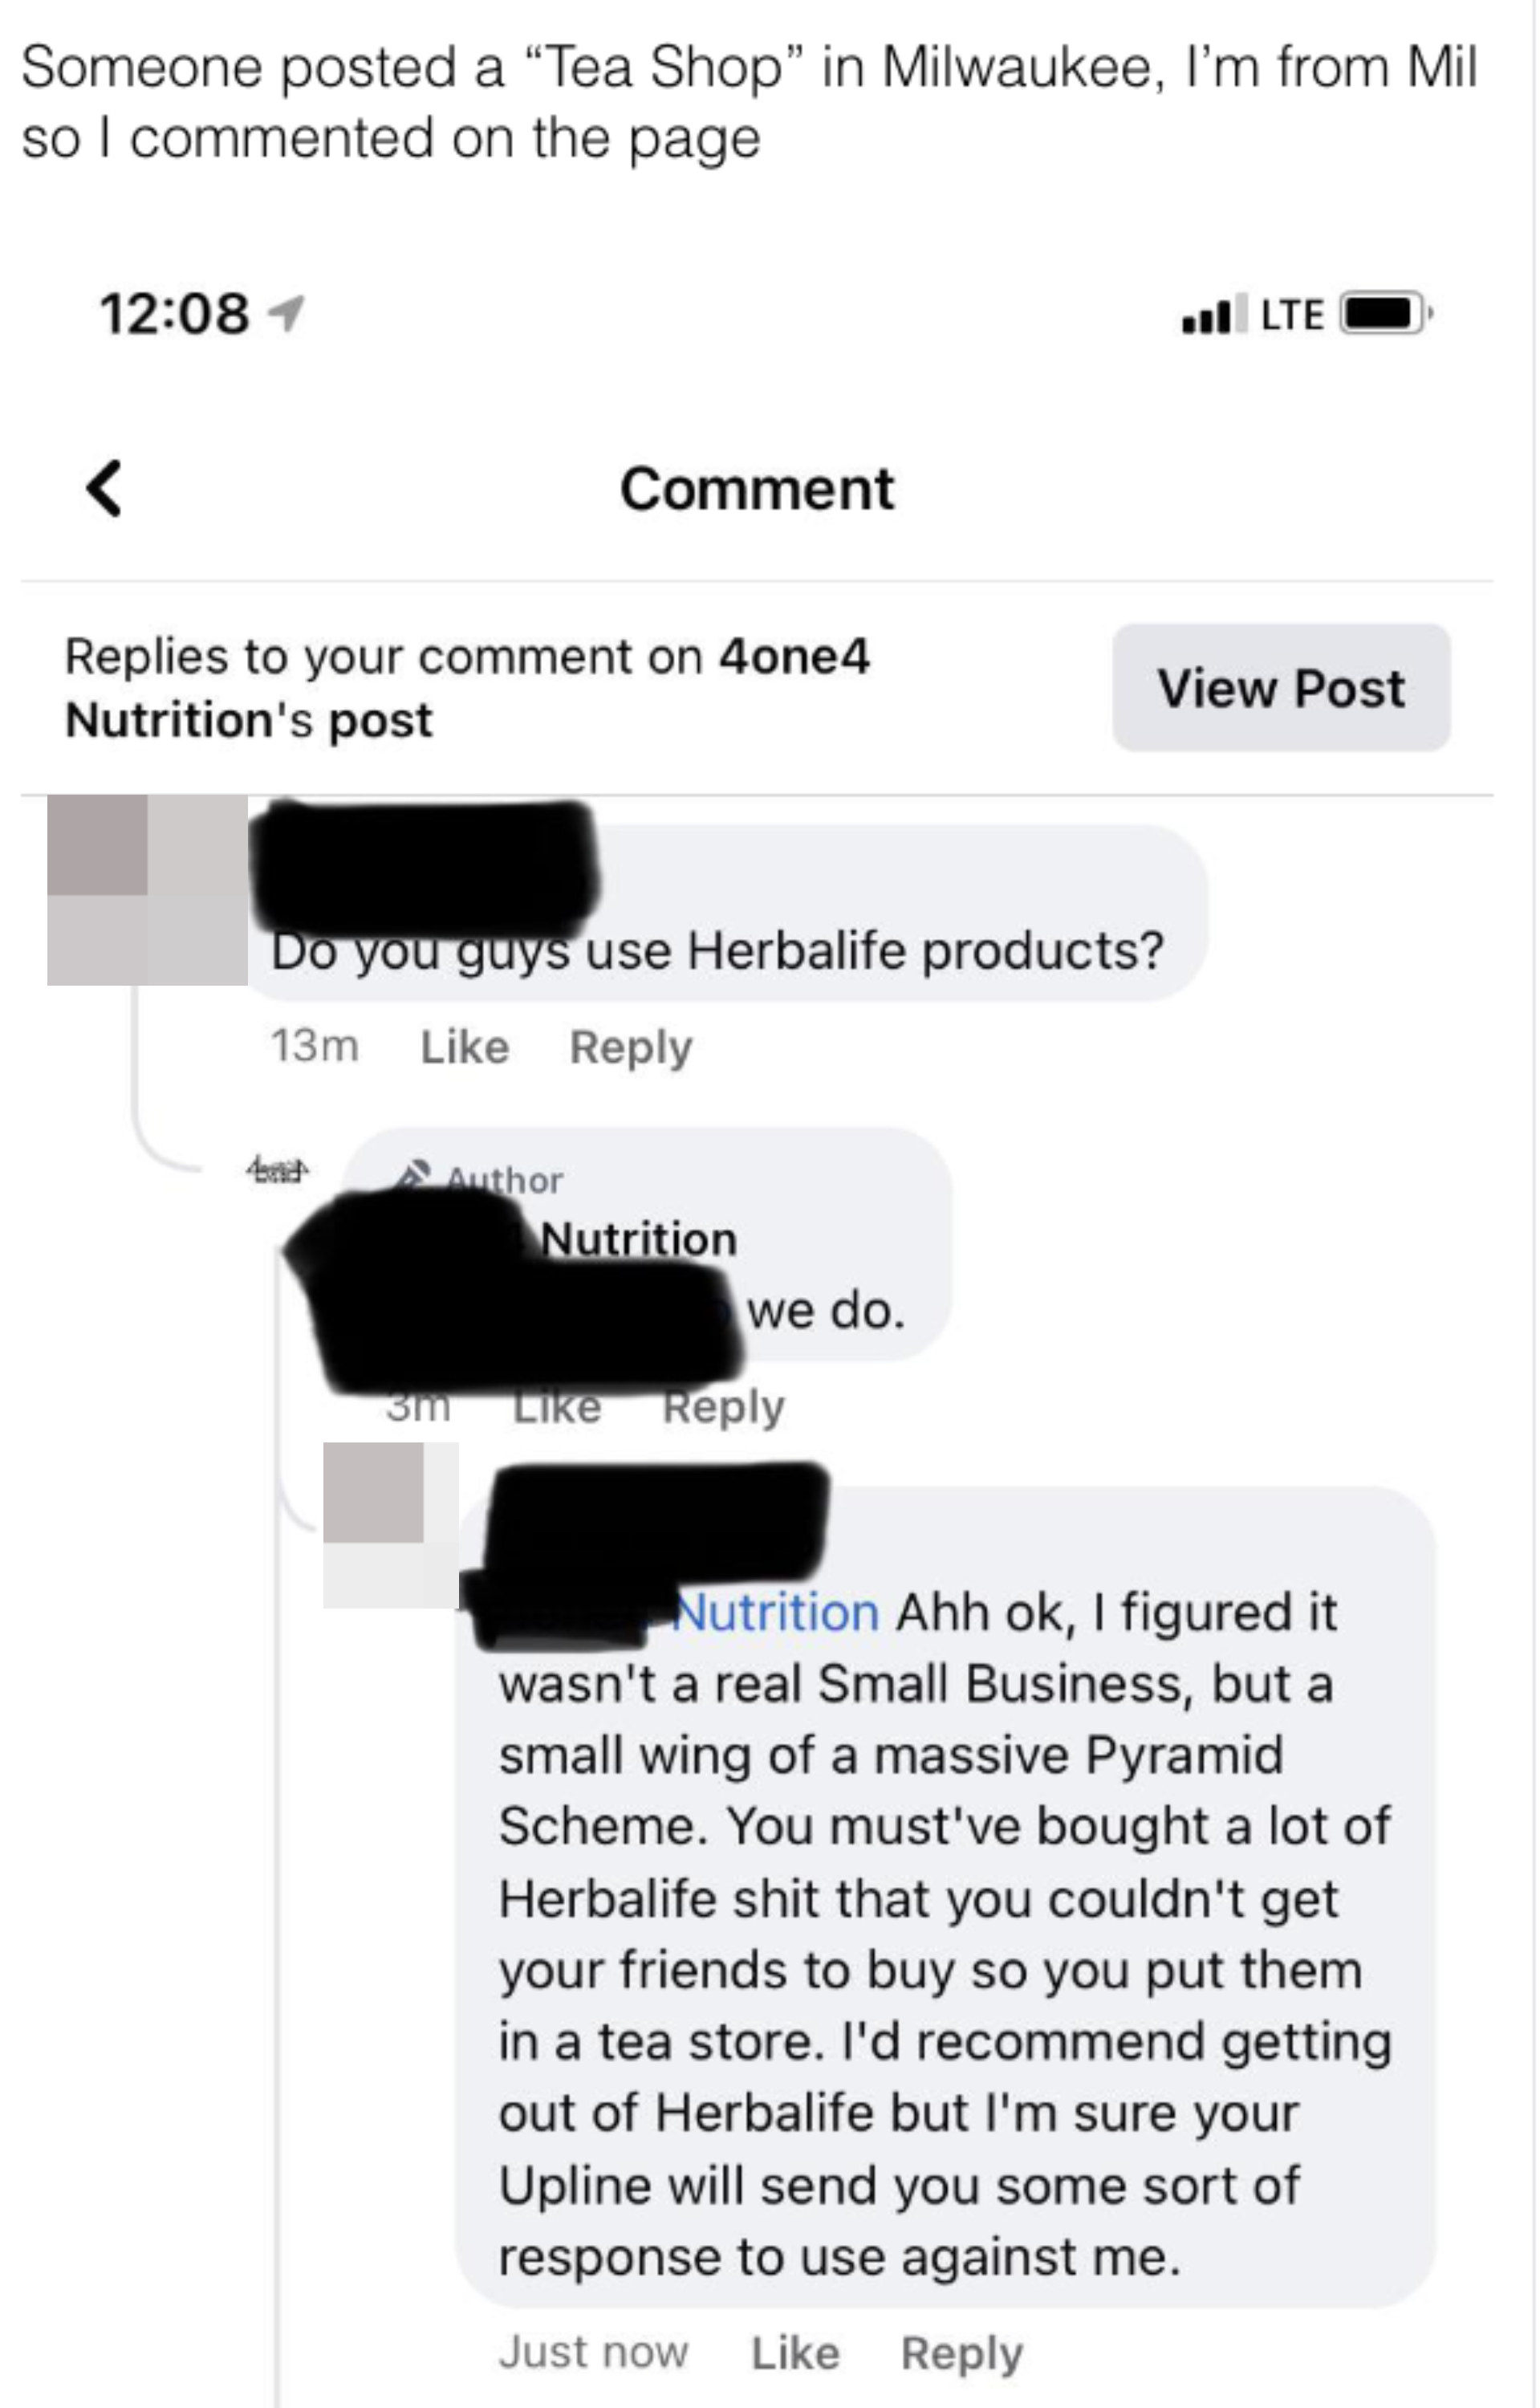 In response to question about liking Herbalife, they replied they figured it wasn&#x27;t a real small business but a small wing of a massive pyramid scheme, and the person must&#x27;ve bought a massive amount of it that they couldn&#x27;t get rid of